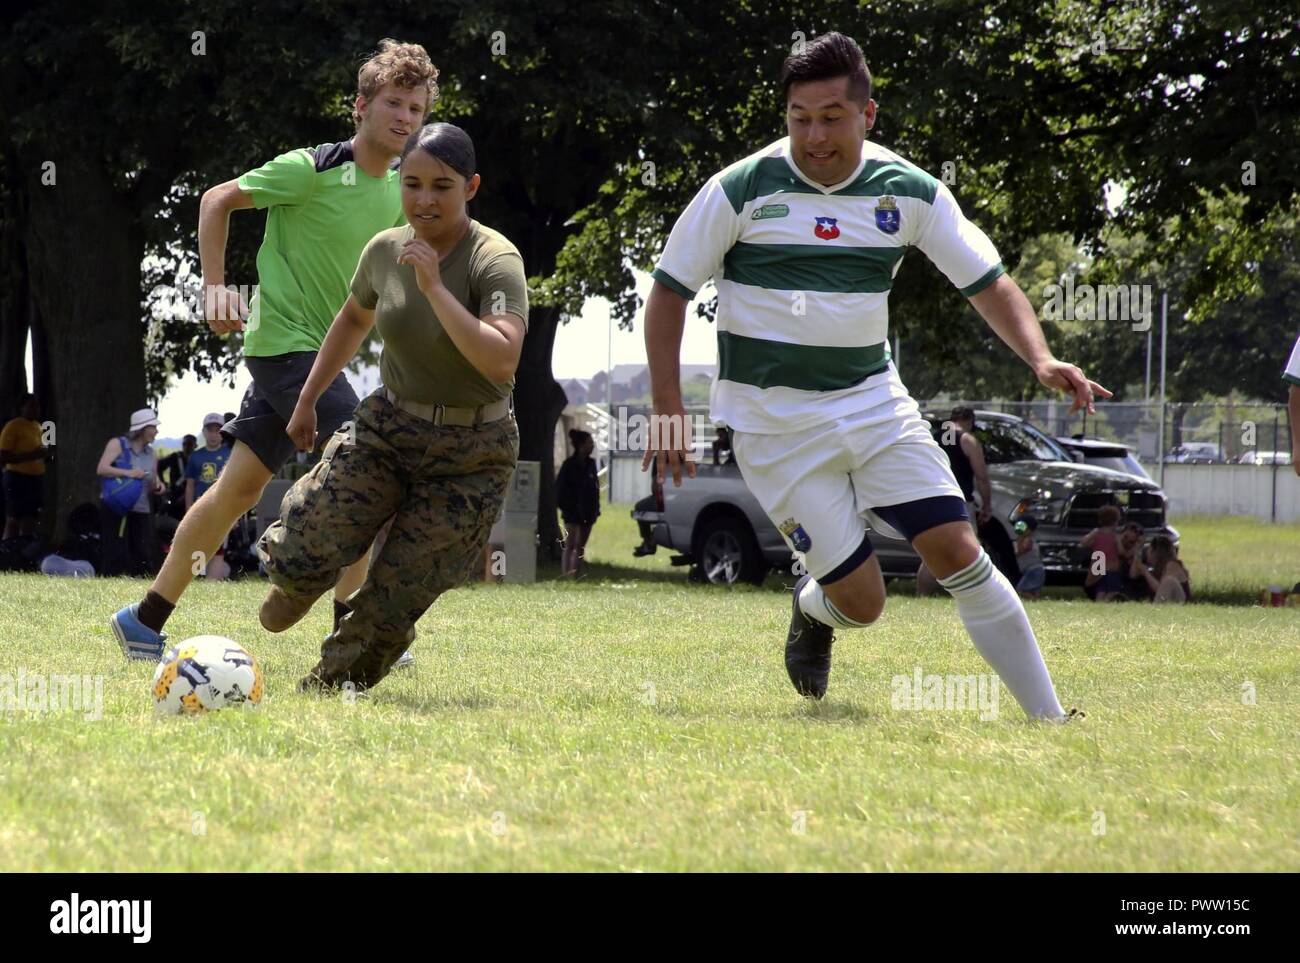 Lance Cpl. Jailine Martinez sprints for the ball during the Sail Boston 2017 Soccer Tournament held at Joe Moakley Park in Boston, Mass., June 20, 2017. The tournament was a friendly competition aimed at establishing rapport among service members from around the world and others participating in Sail Boston. Marines and Sailors from countries including Chile, Peru, and Ecuador attended the tournament. Martinez is a combat photographer assigned to Marine Wing Headquarters Squadron 2, Marine Aircraft Group 14, 2nd Marine Aircraft Wing. Stock Photo